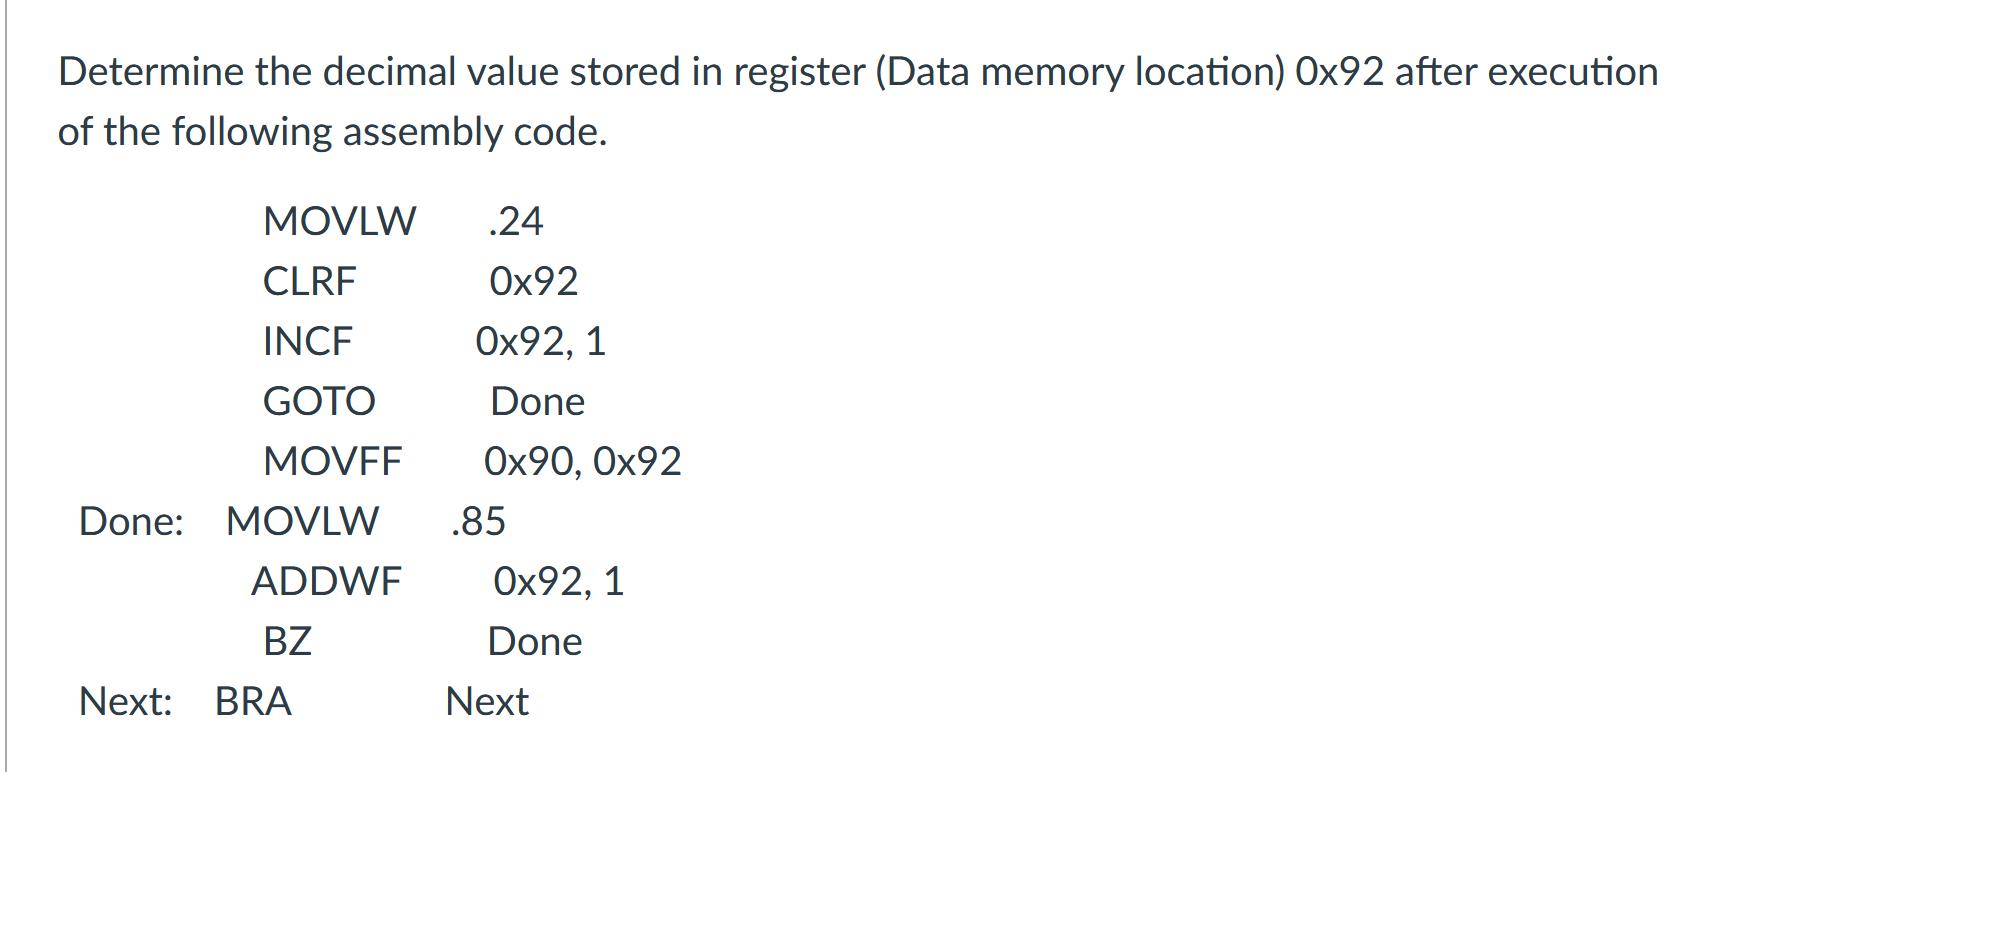 Determine the decimal value stored in register (Data memory location) Ox92 after execution of the following